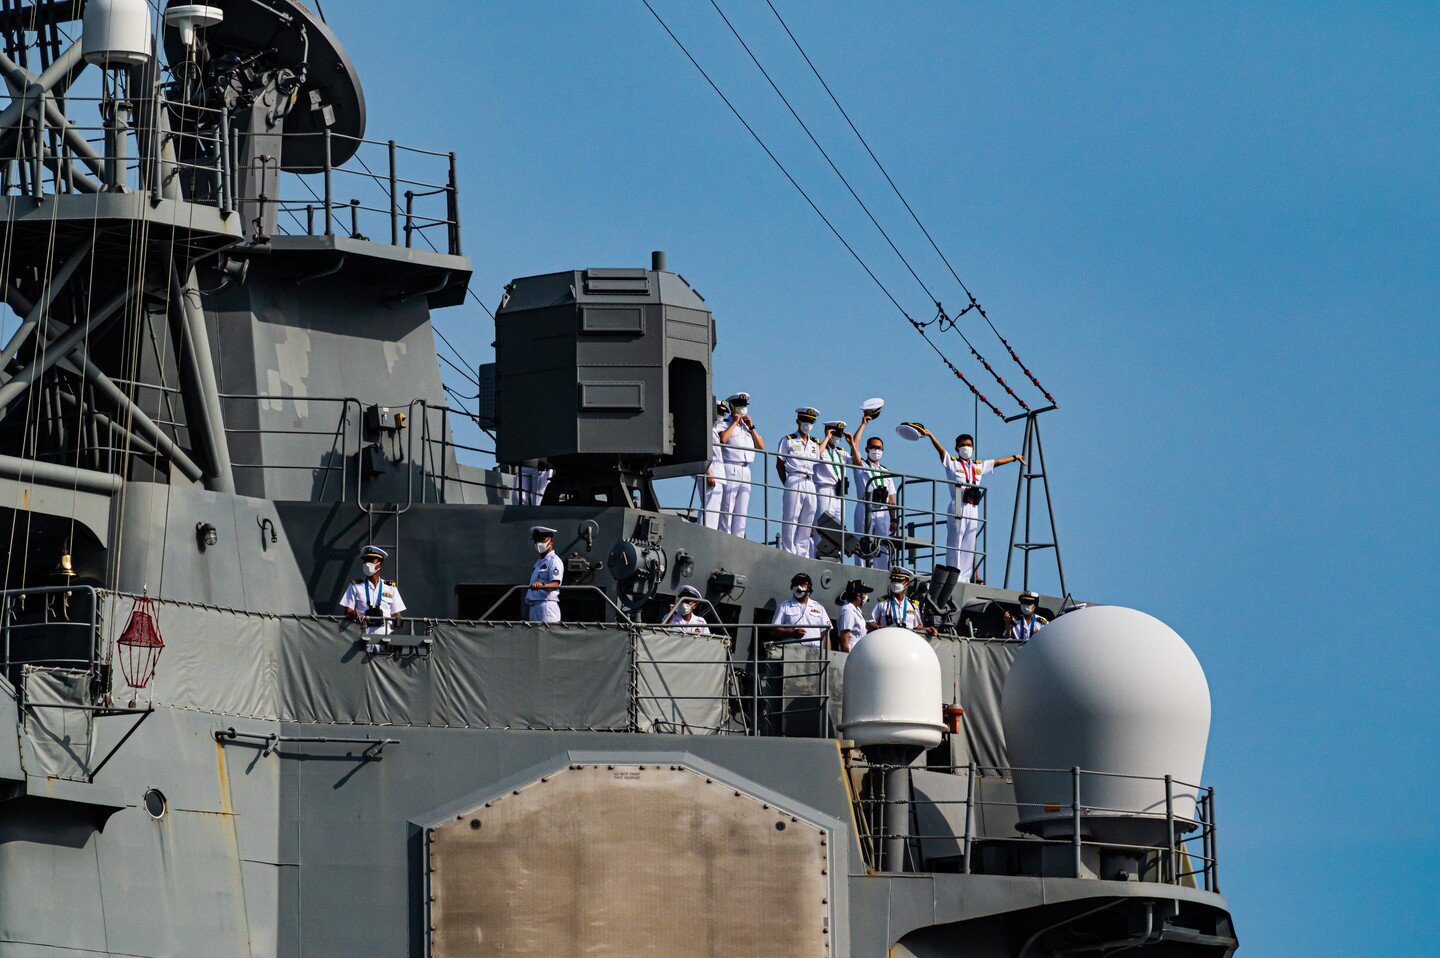 Some more #photos of the #jmsdf #japanmaritimeselfdefenseforce #destroyer #kirishima

The crew waves farewell from the #deck of the #ship as they set sail. 

Only a couple more batches of #photography of the #warship left!

#海上自衛隊 #護衛艦 #きりしま #護衛艦きりしま